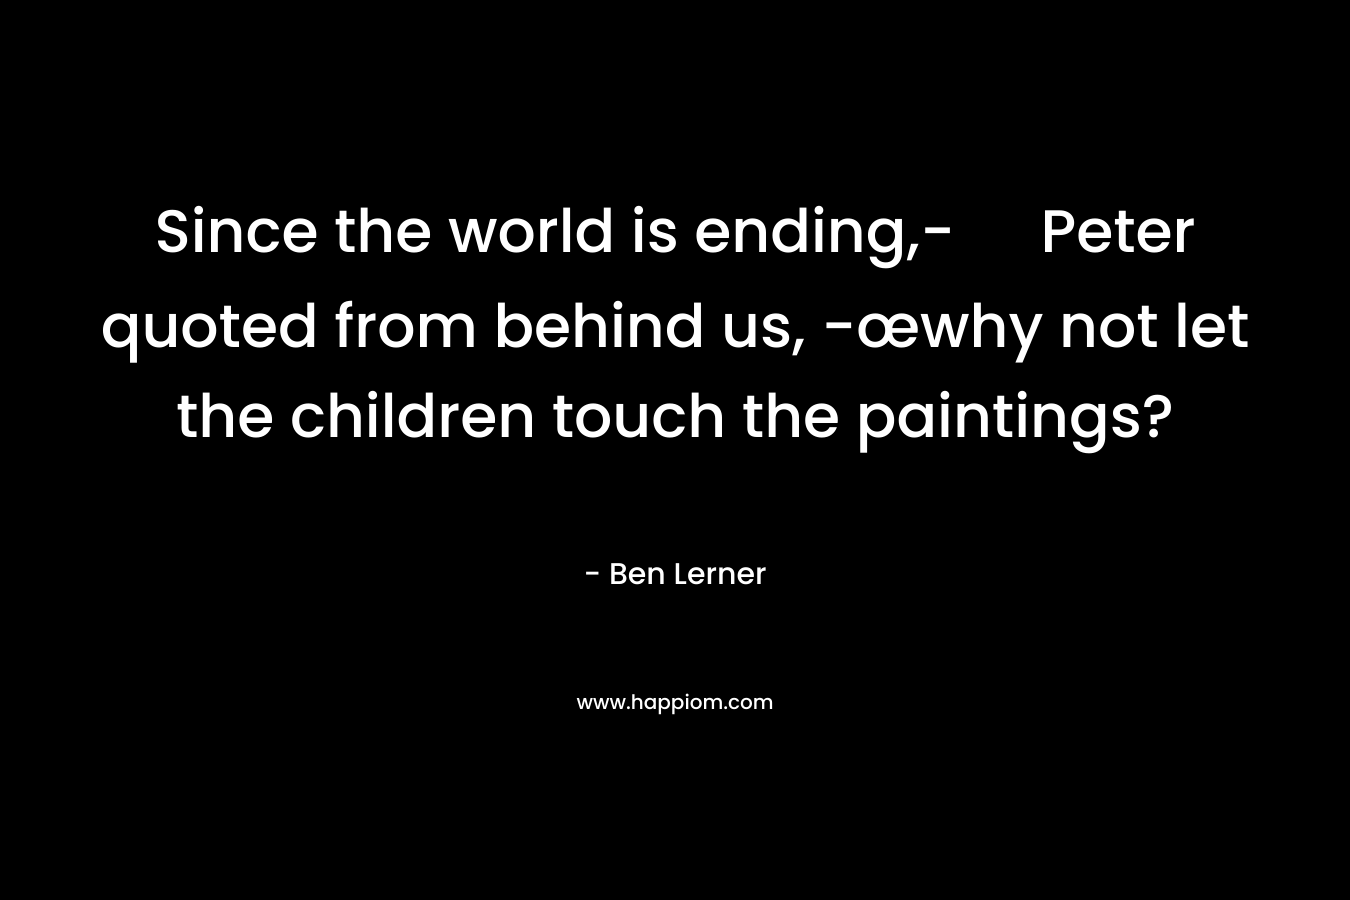 Since the world is ending,- Peter quoted from behind us, -œwhy not let the children touch the paintings? – Ben Lerner